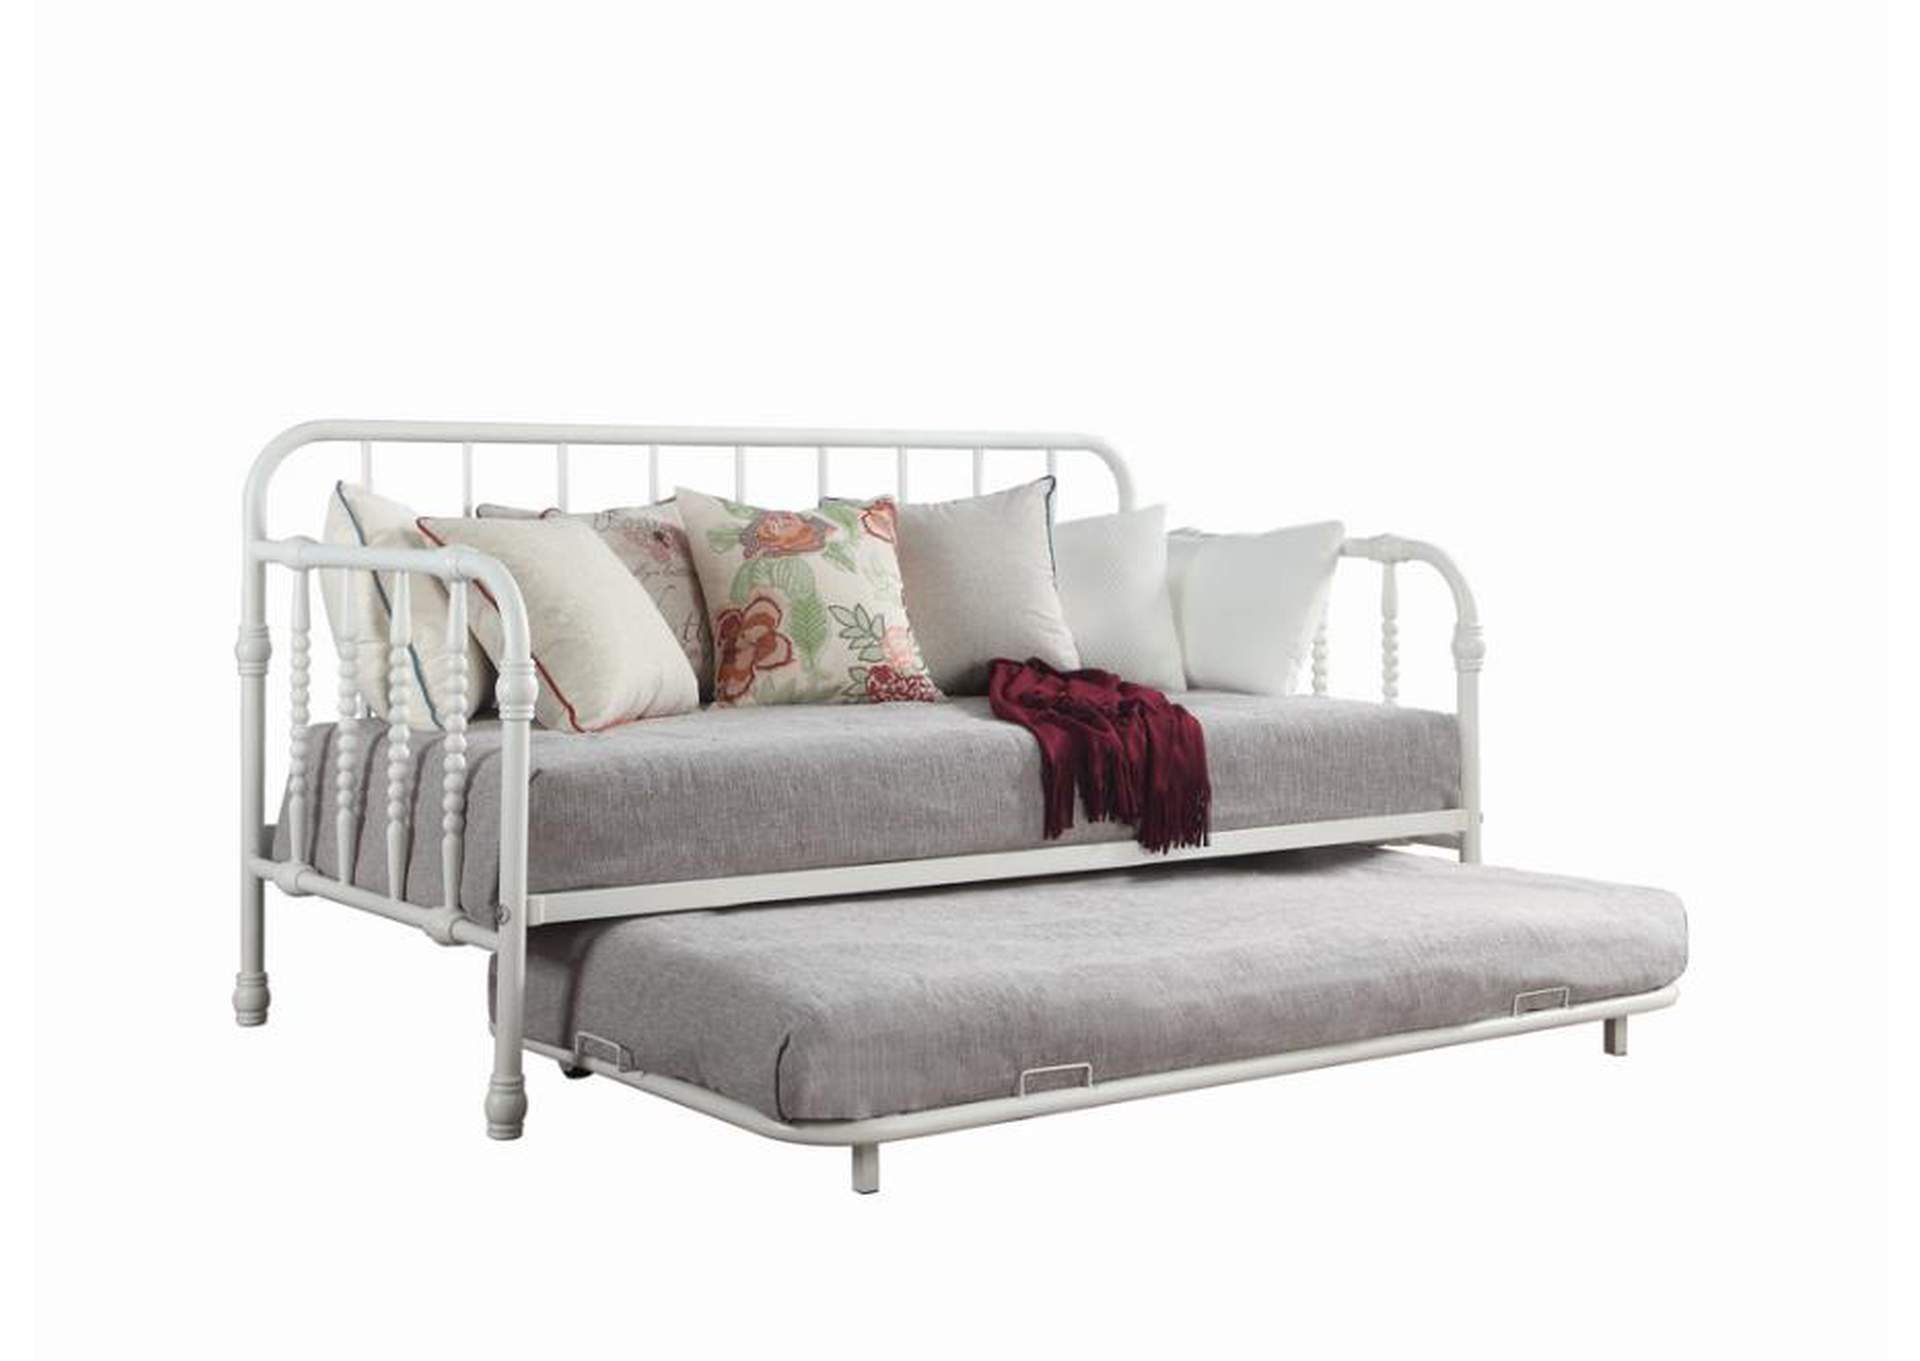 Marina Twin Metal Daybed with Trundle White,Coaster Furniture